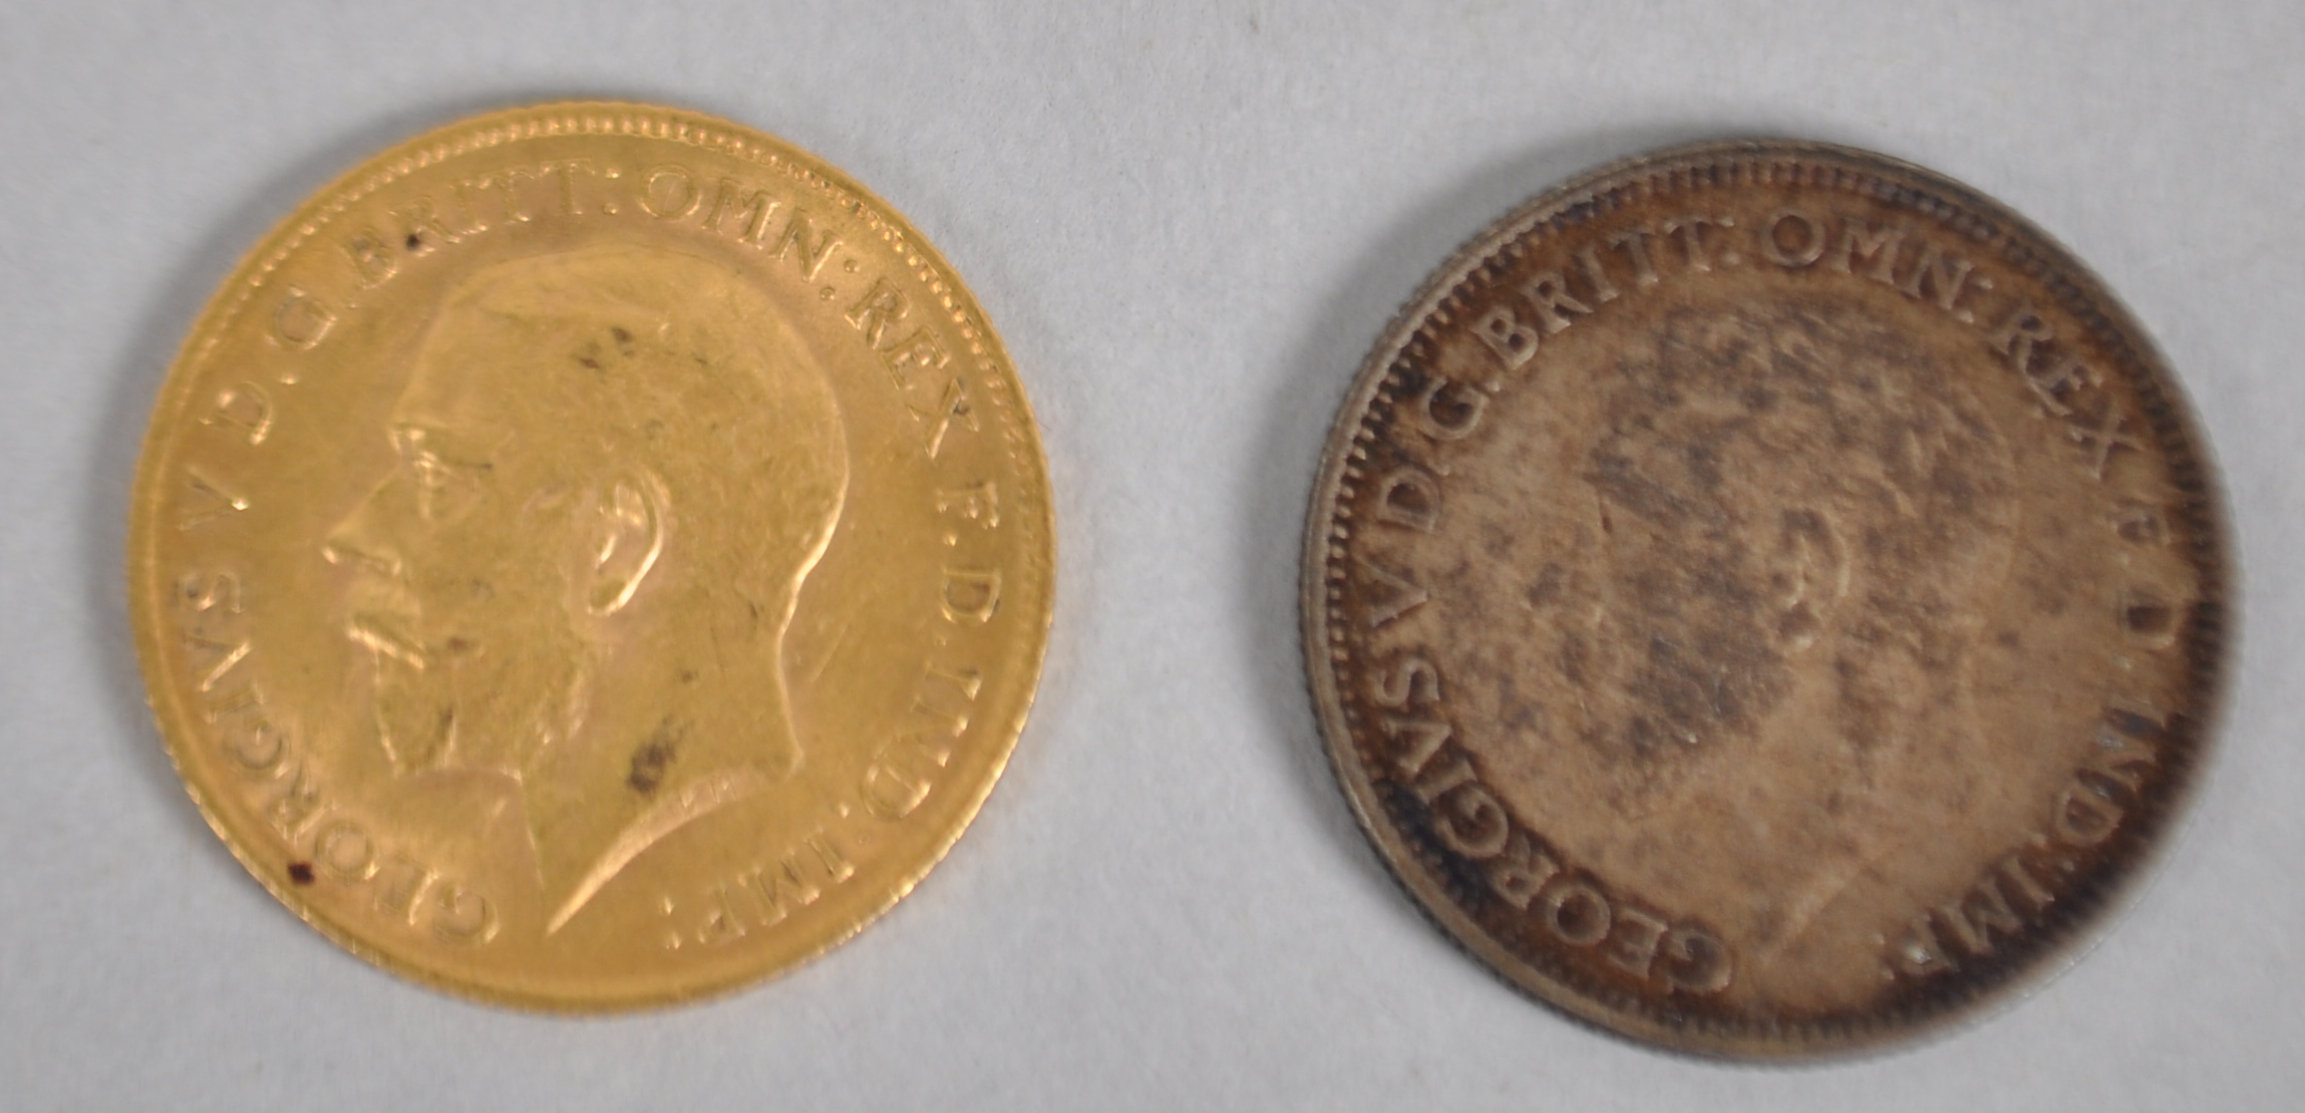 A half sovereign coin dated 1911 together with a silver sixpence coin dated 1935.